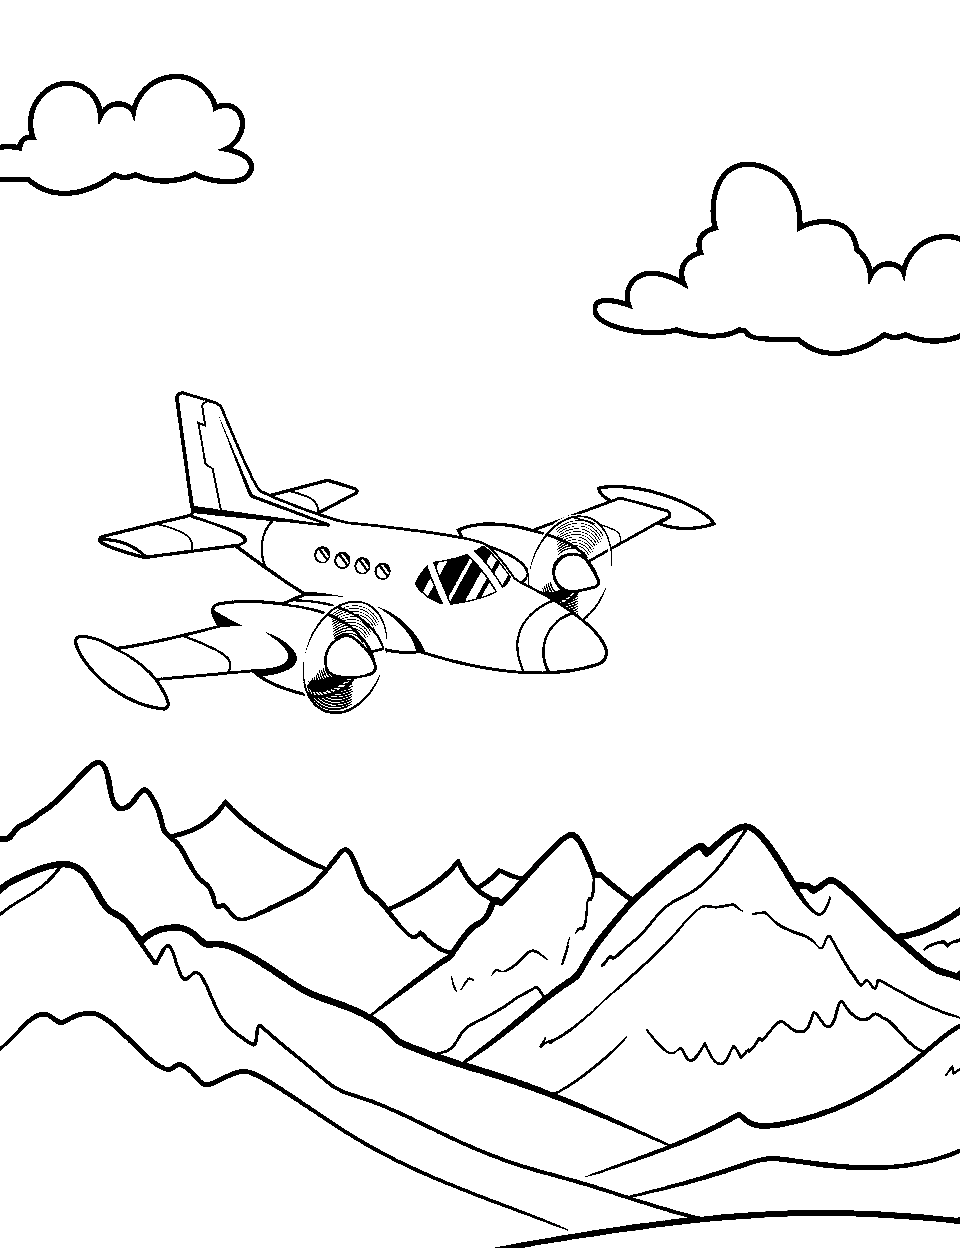 Rescue Plane Airplane Coloring Page - A rescue plane flying over a mountain range.